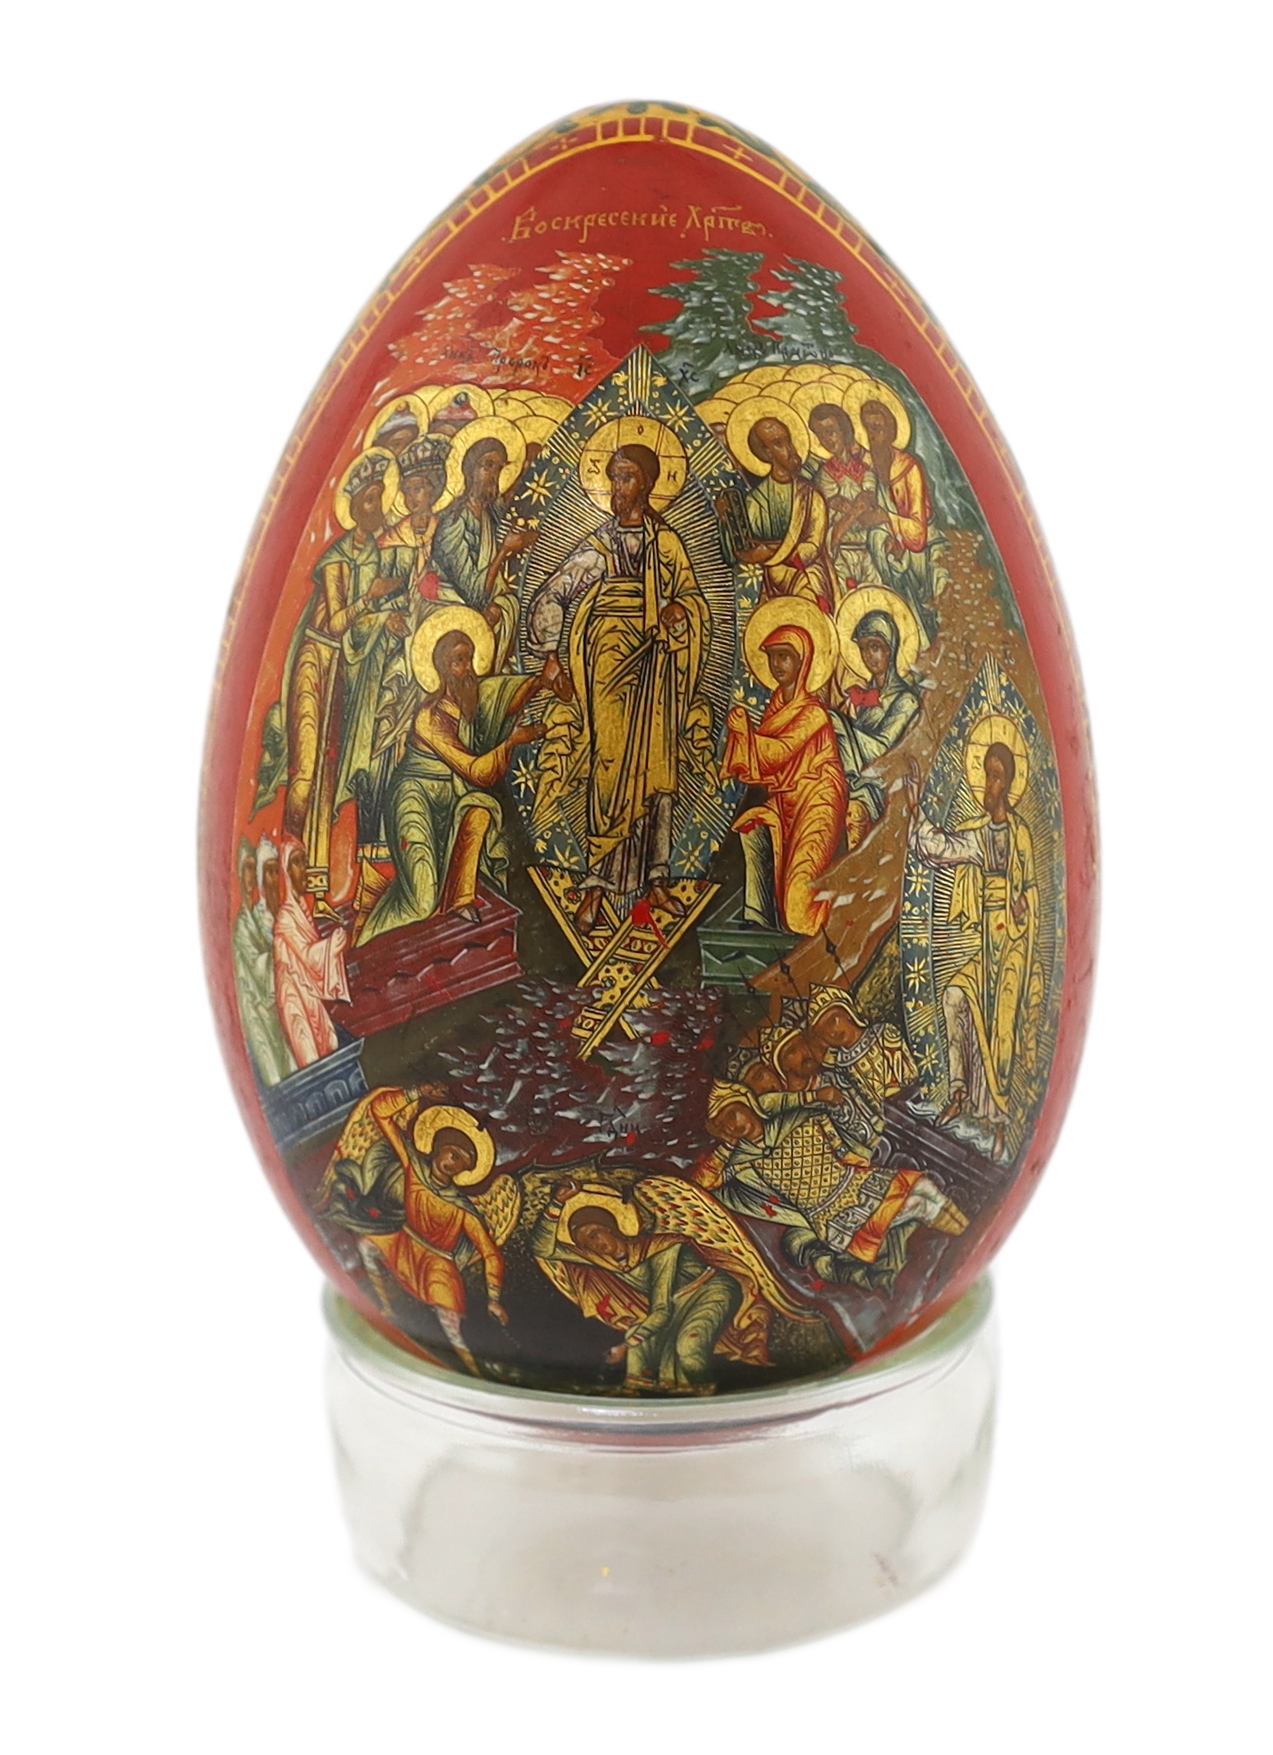 A Russian lacquer Easter egg, attributed to Lukutin, mid 19th century                                                                                                                                                       